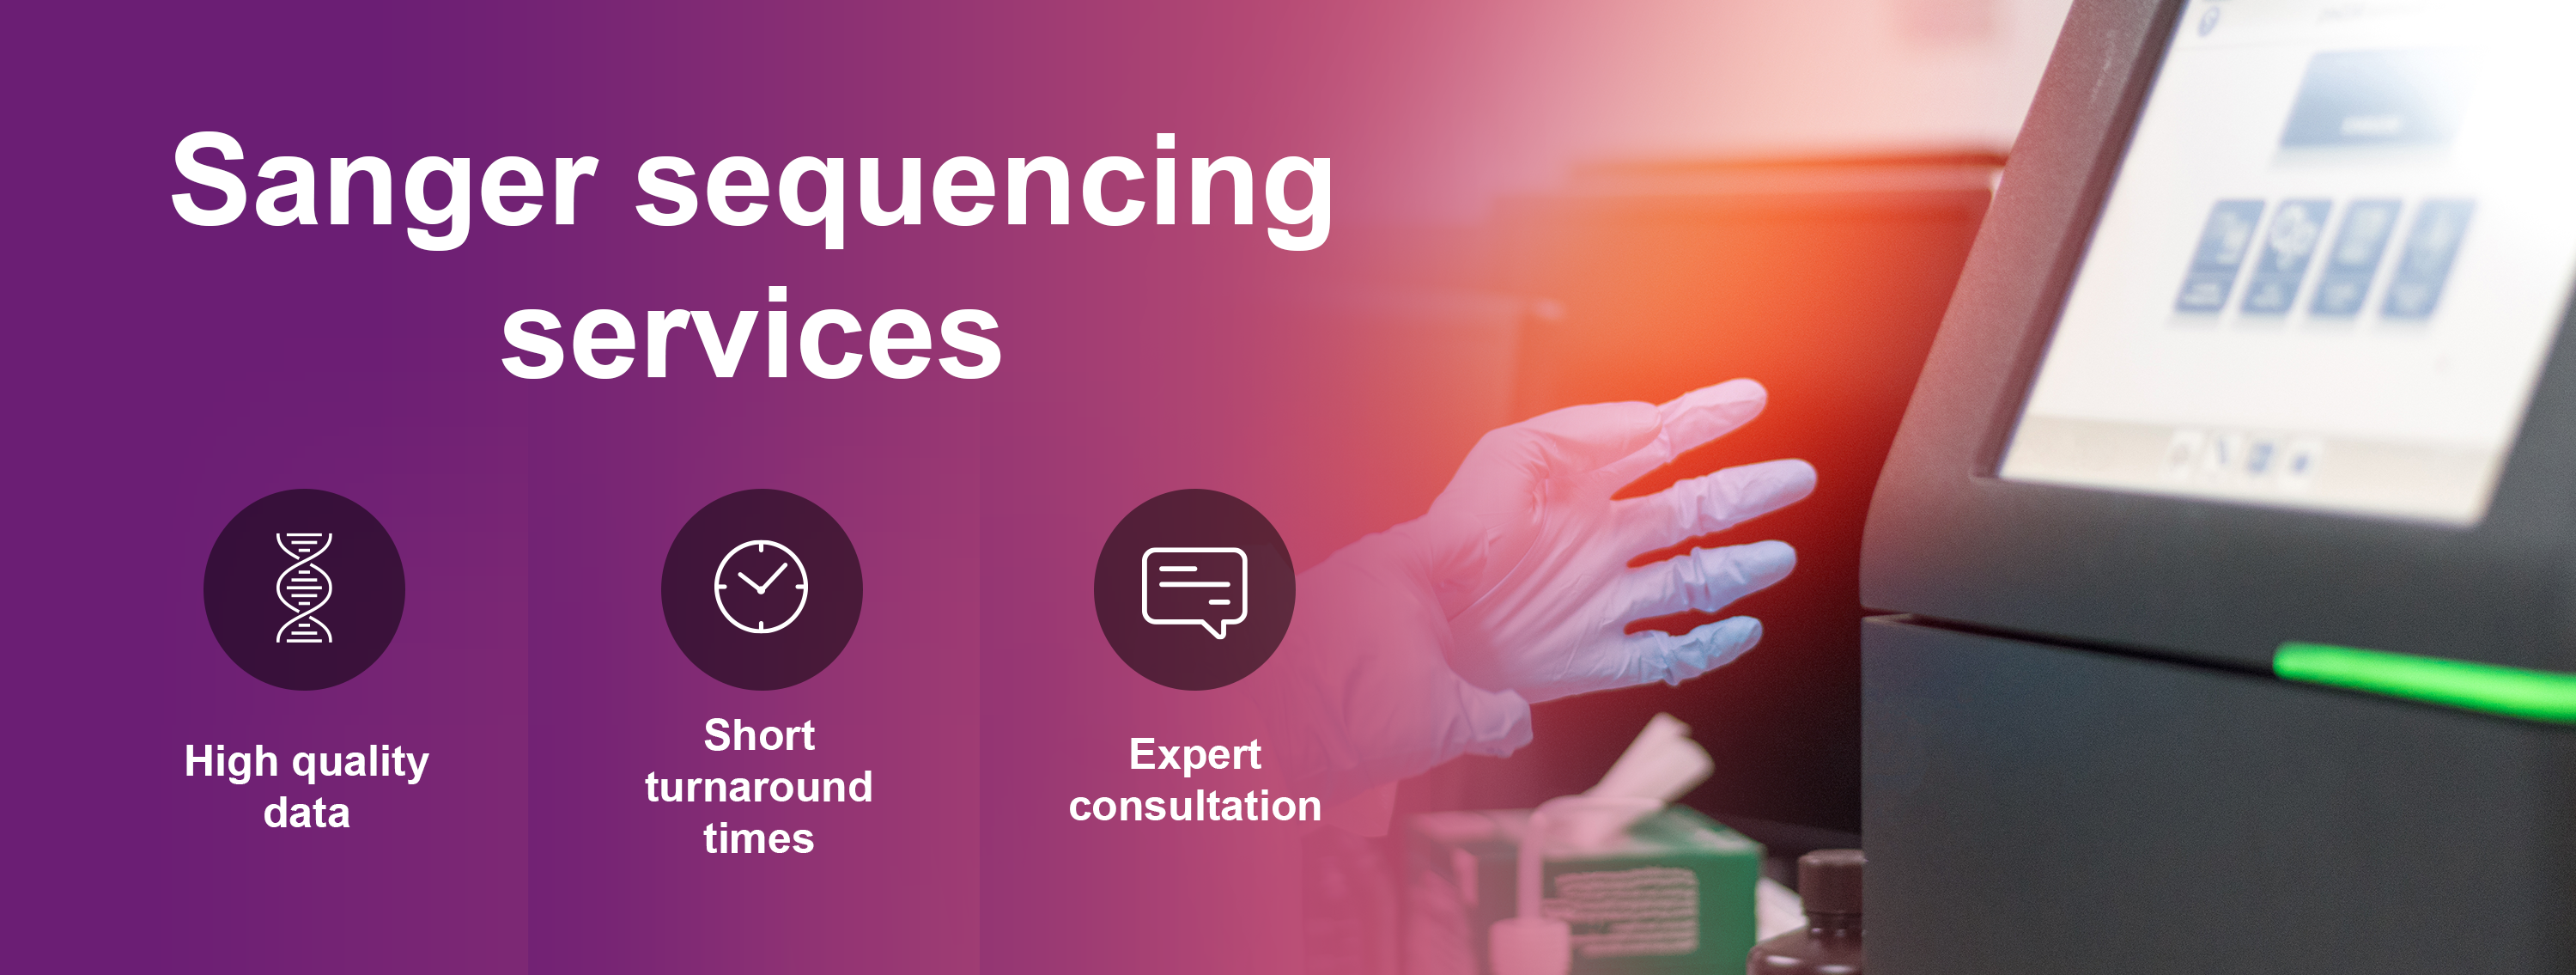 sanger sequencing lab services